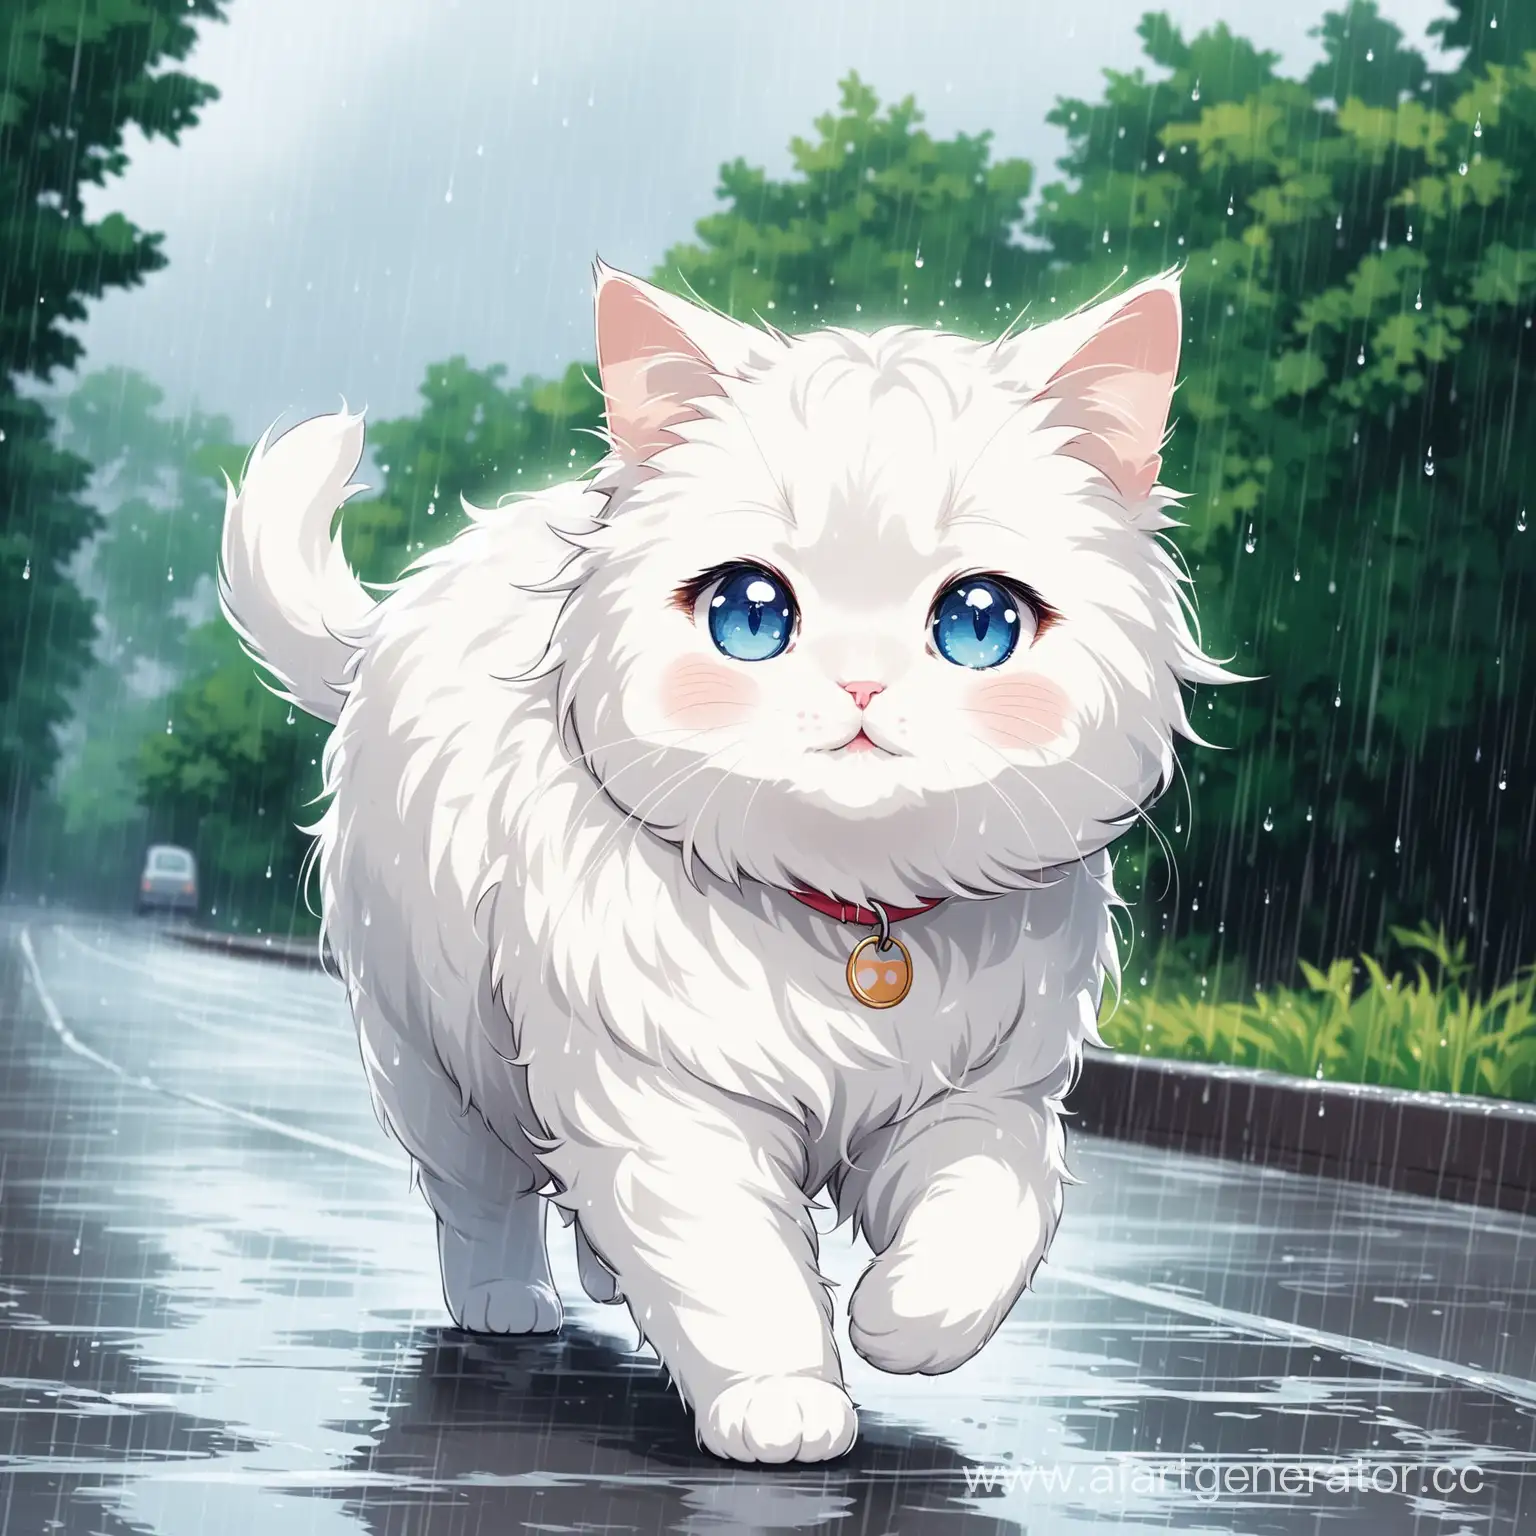 A cute fluffy white cat, walking, in rainy weather